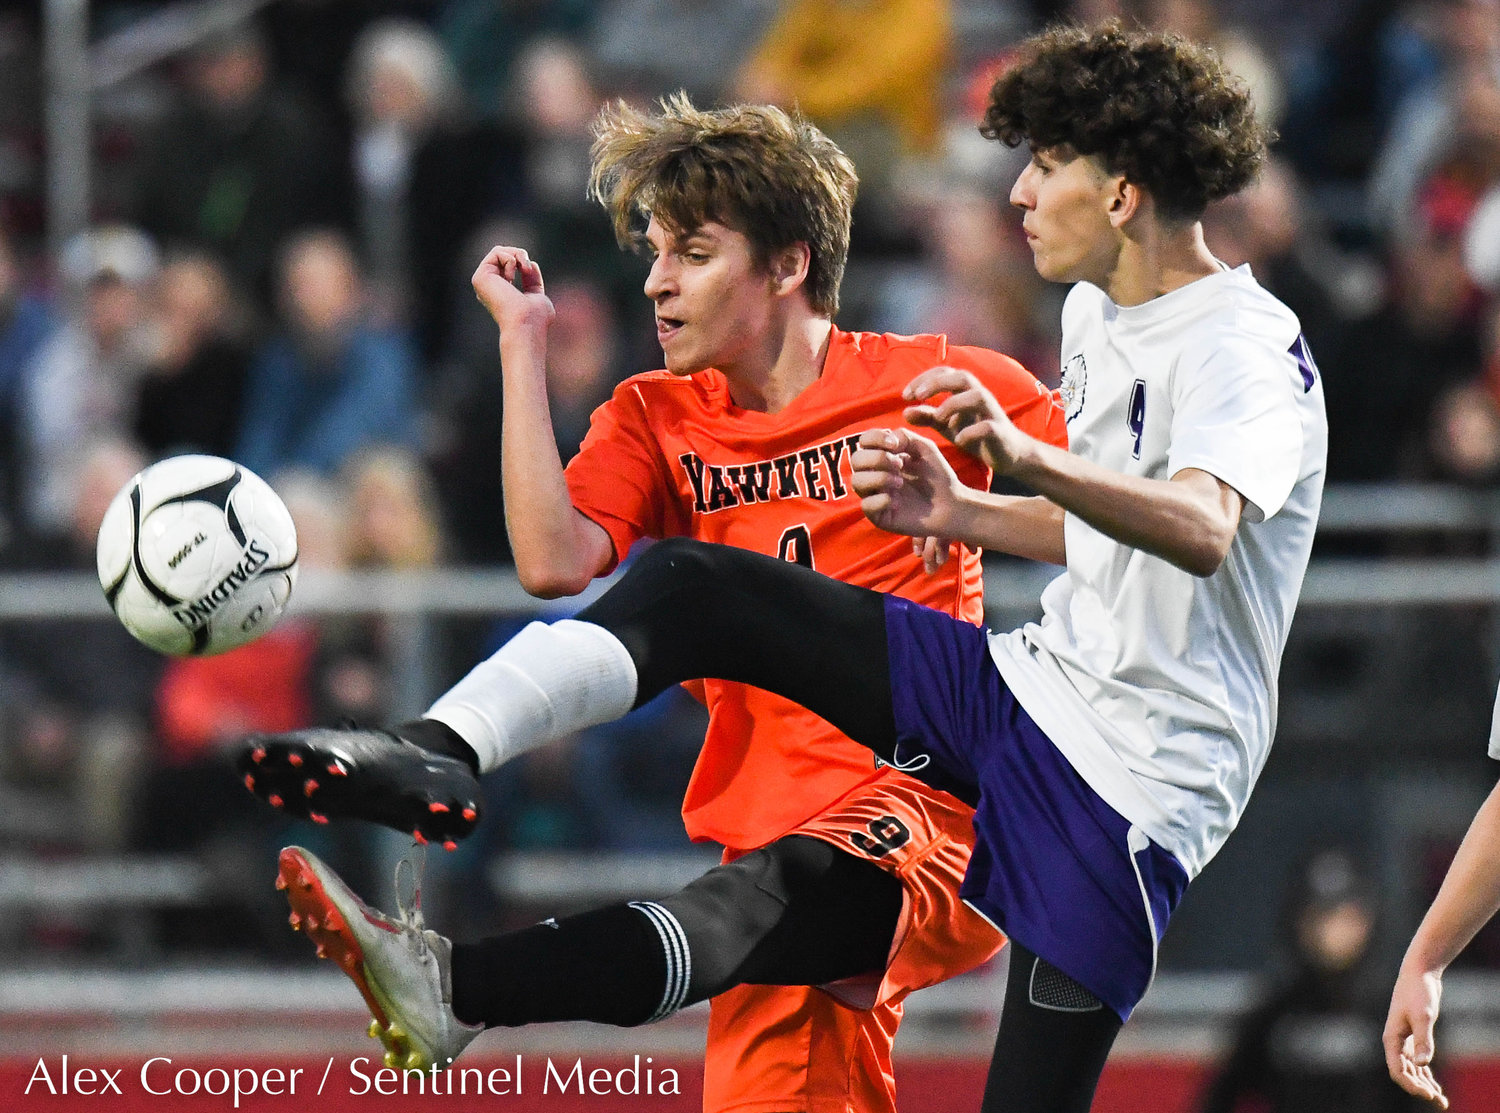 Cooperstown player Oliver Wasson and Waterville player Tyler Owens fight for control of the ball during the Section III Class C final on Tuesday, Nov. 1 at VVS High School. Cooperstown won 1-0 in overtime.